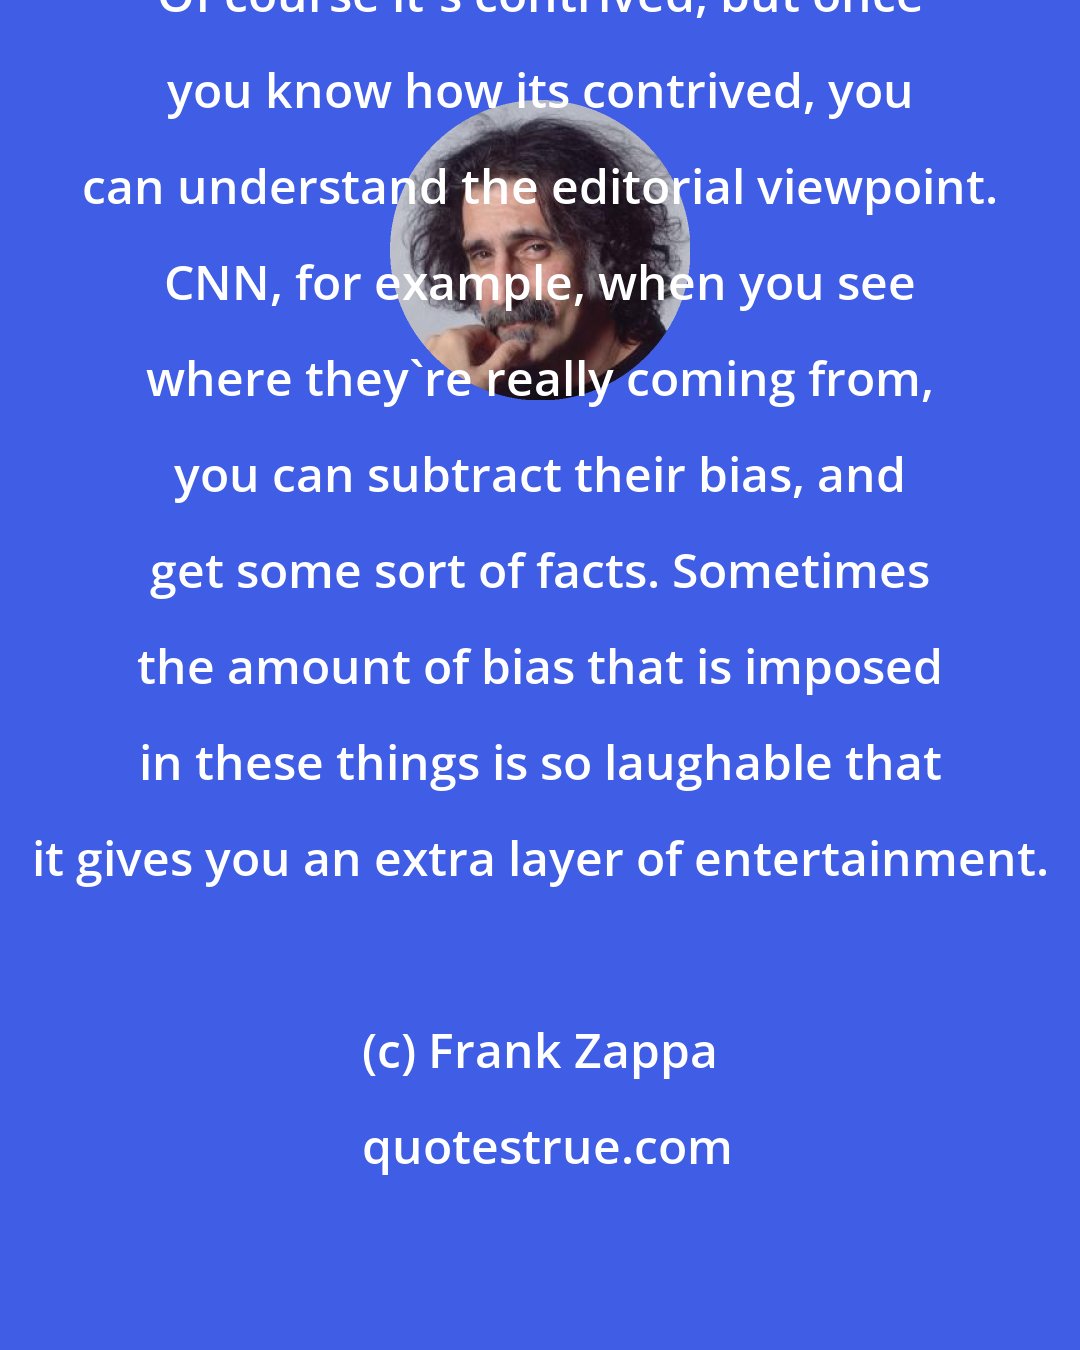 Frank Zappa: Of course it's contrived, but once you know how its contrived, you can understand the editorial viewpoint. CNN, for example, when you see where they're really coming from, you can subtract their bias, and get some sort of facts. Sometimes the amount of bias that is imposed in these things is so laughable that it gives you an extra layer of entertainment.